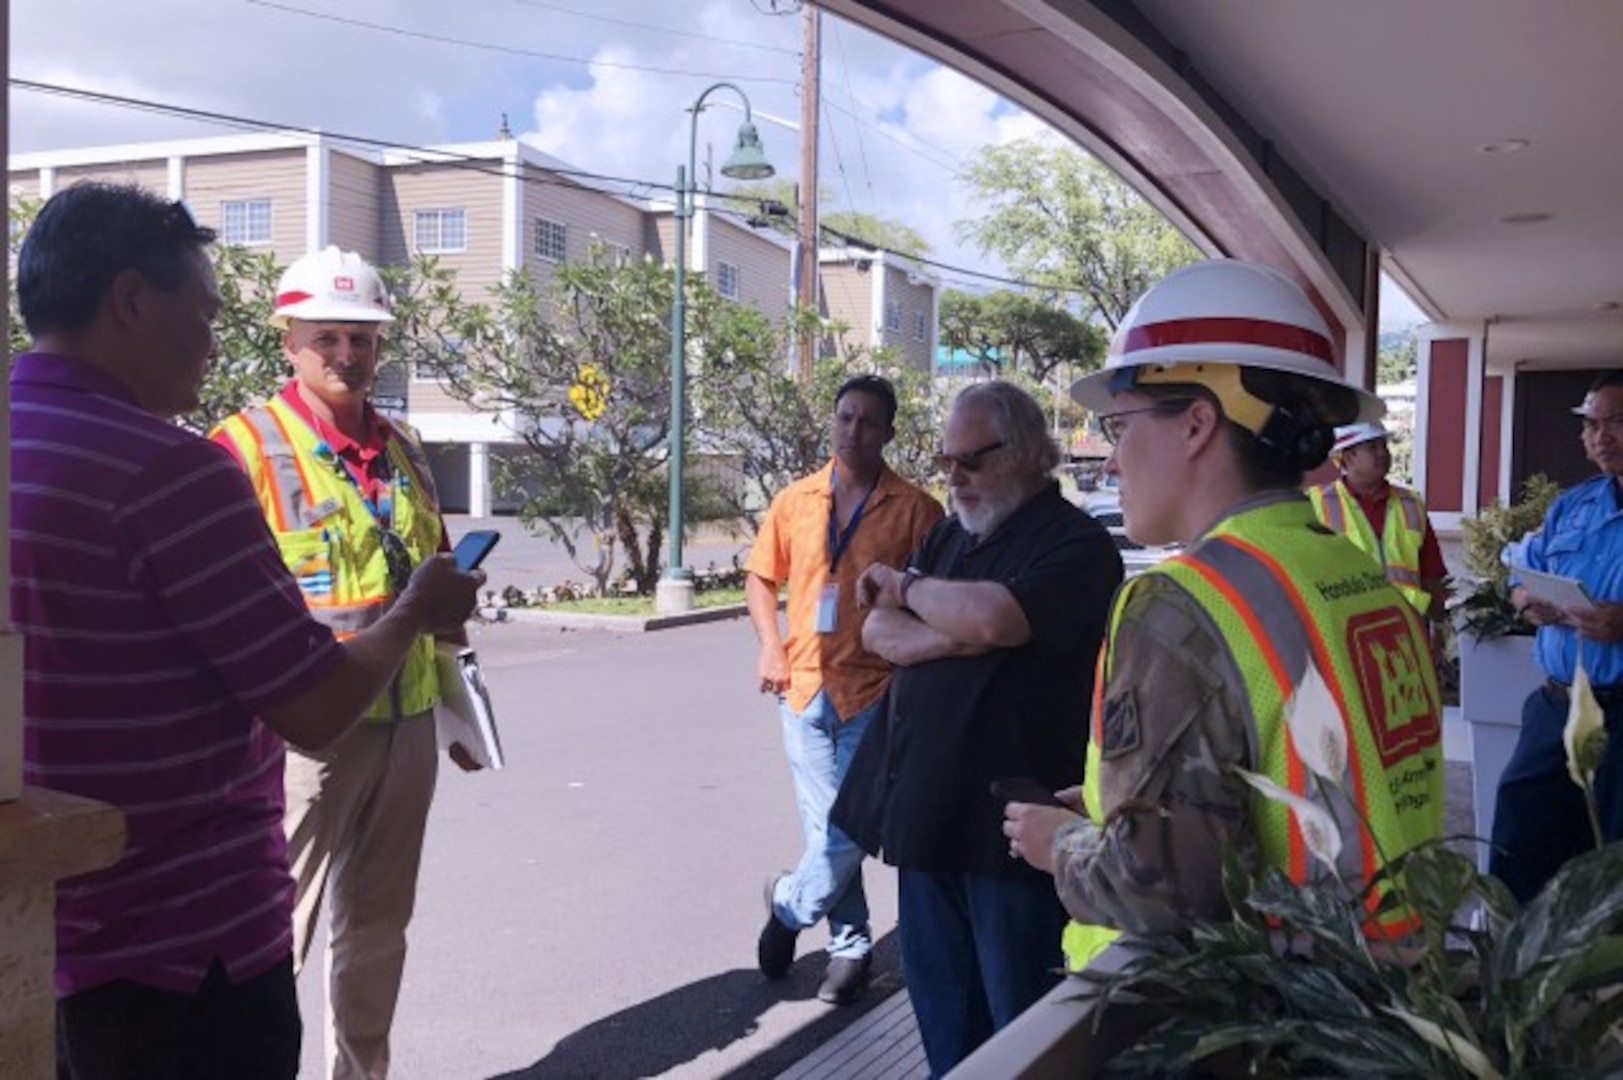 U.S. Army Corps of Engineers Evaluates Hawaii County Facilities for Use as Potential Alternate Care Facilities